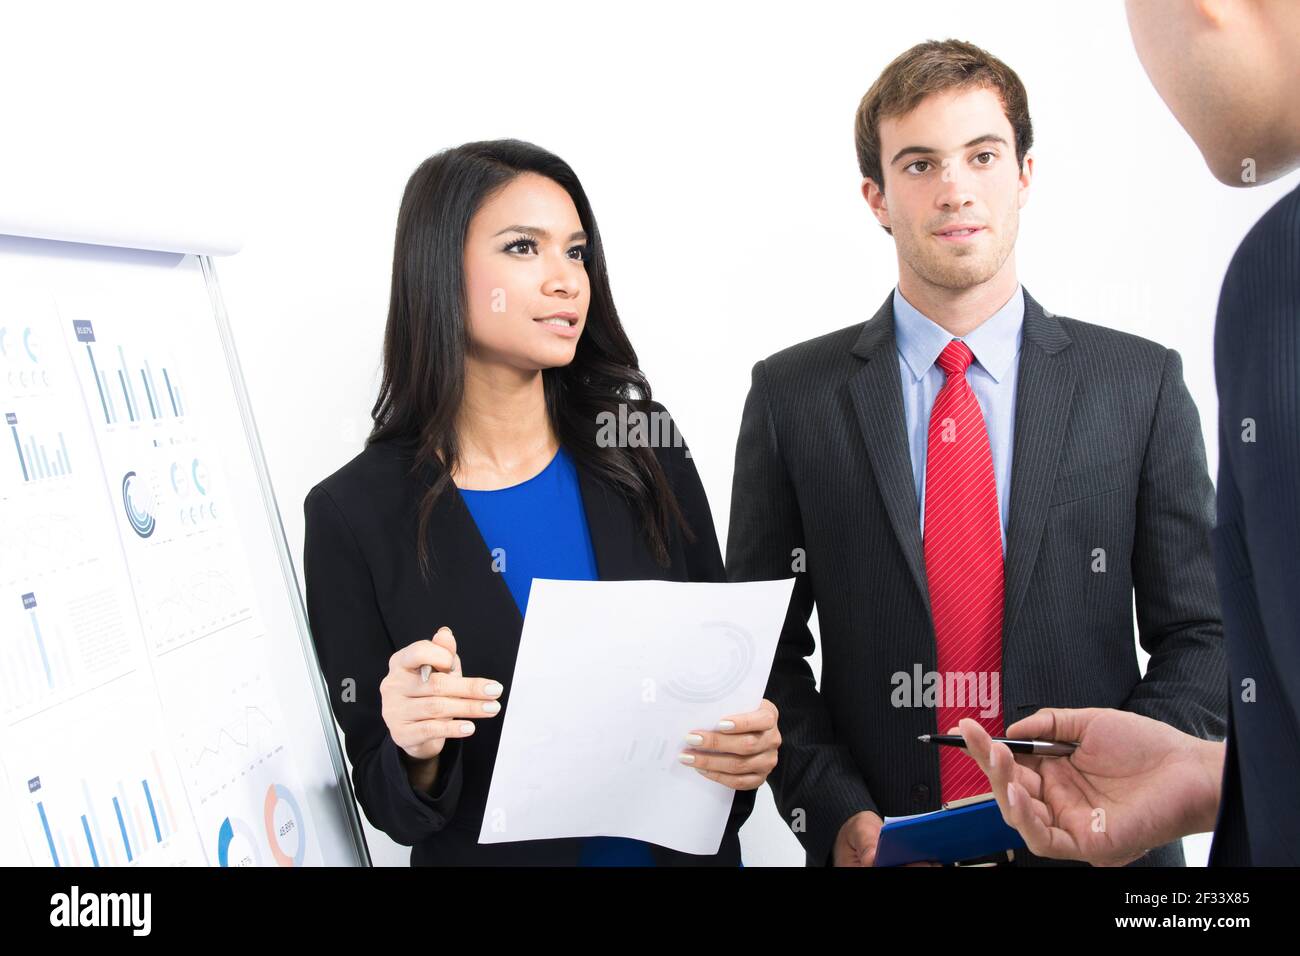 Business people discussing (presenting) work in the office Stock Photo